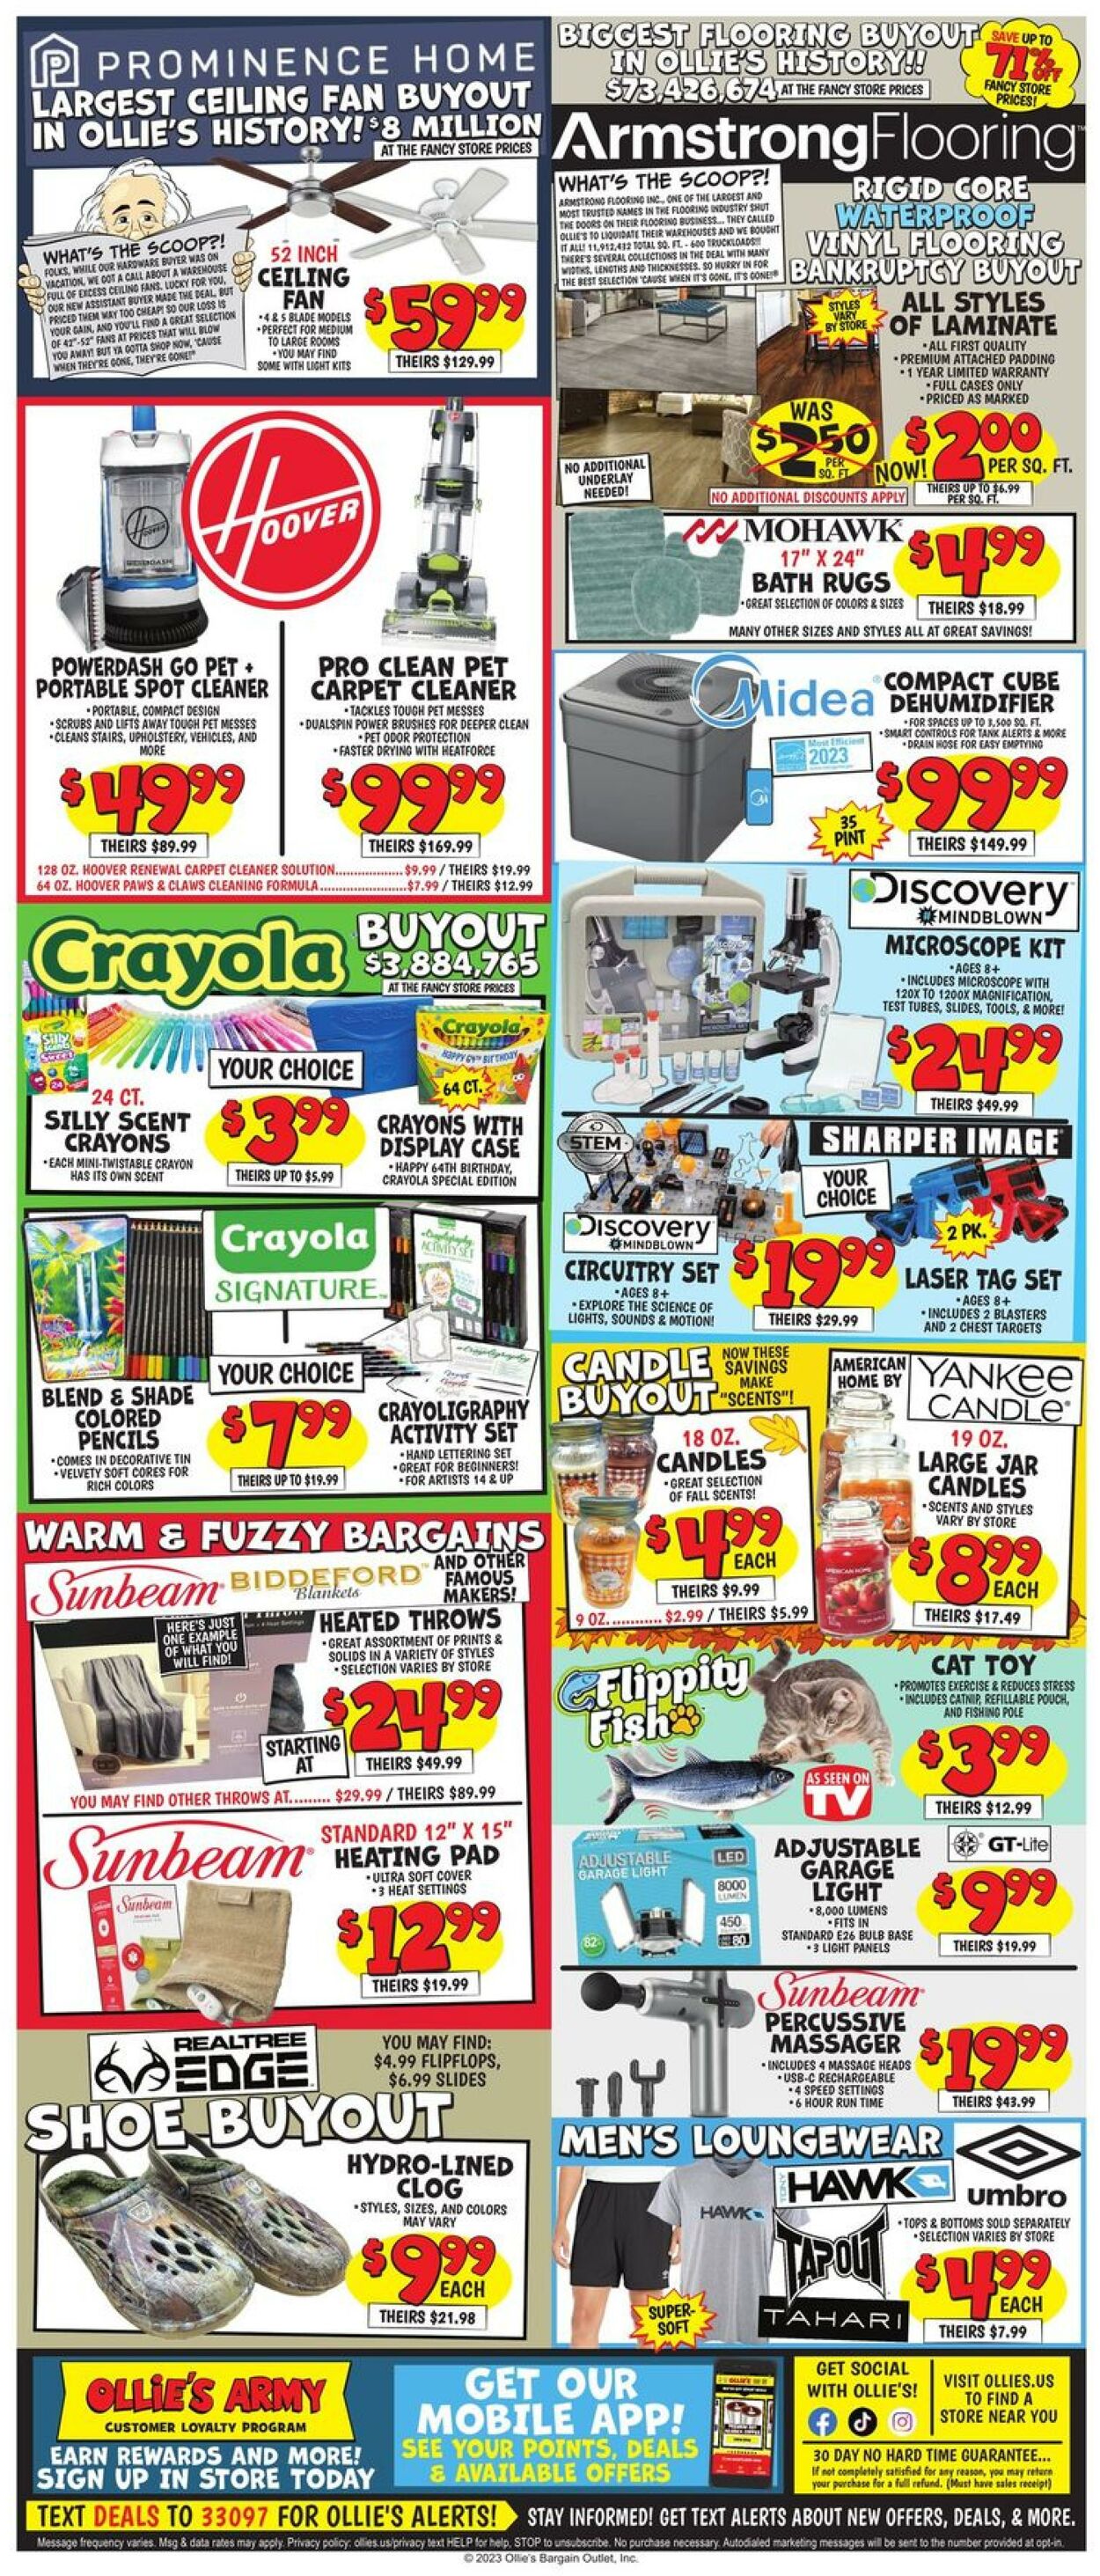 Ollie's Ad from 08/24/2023